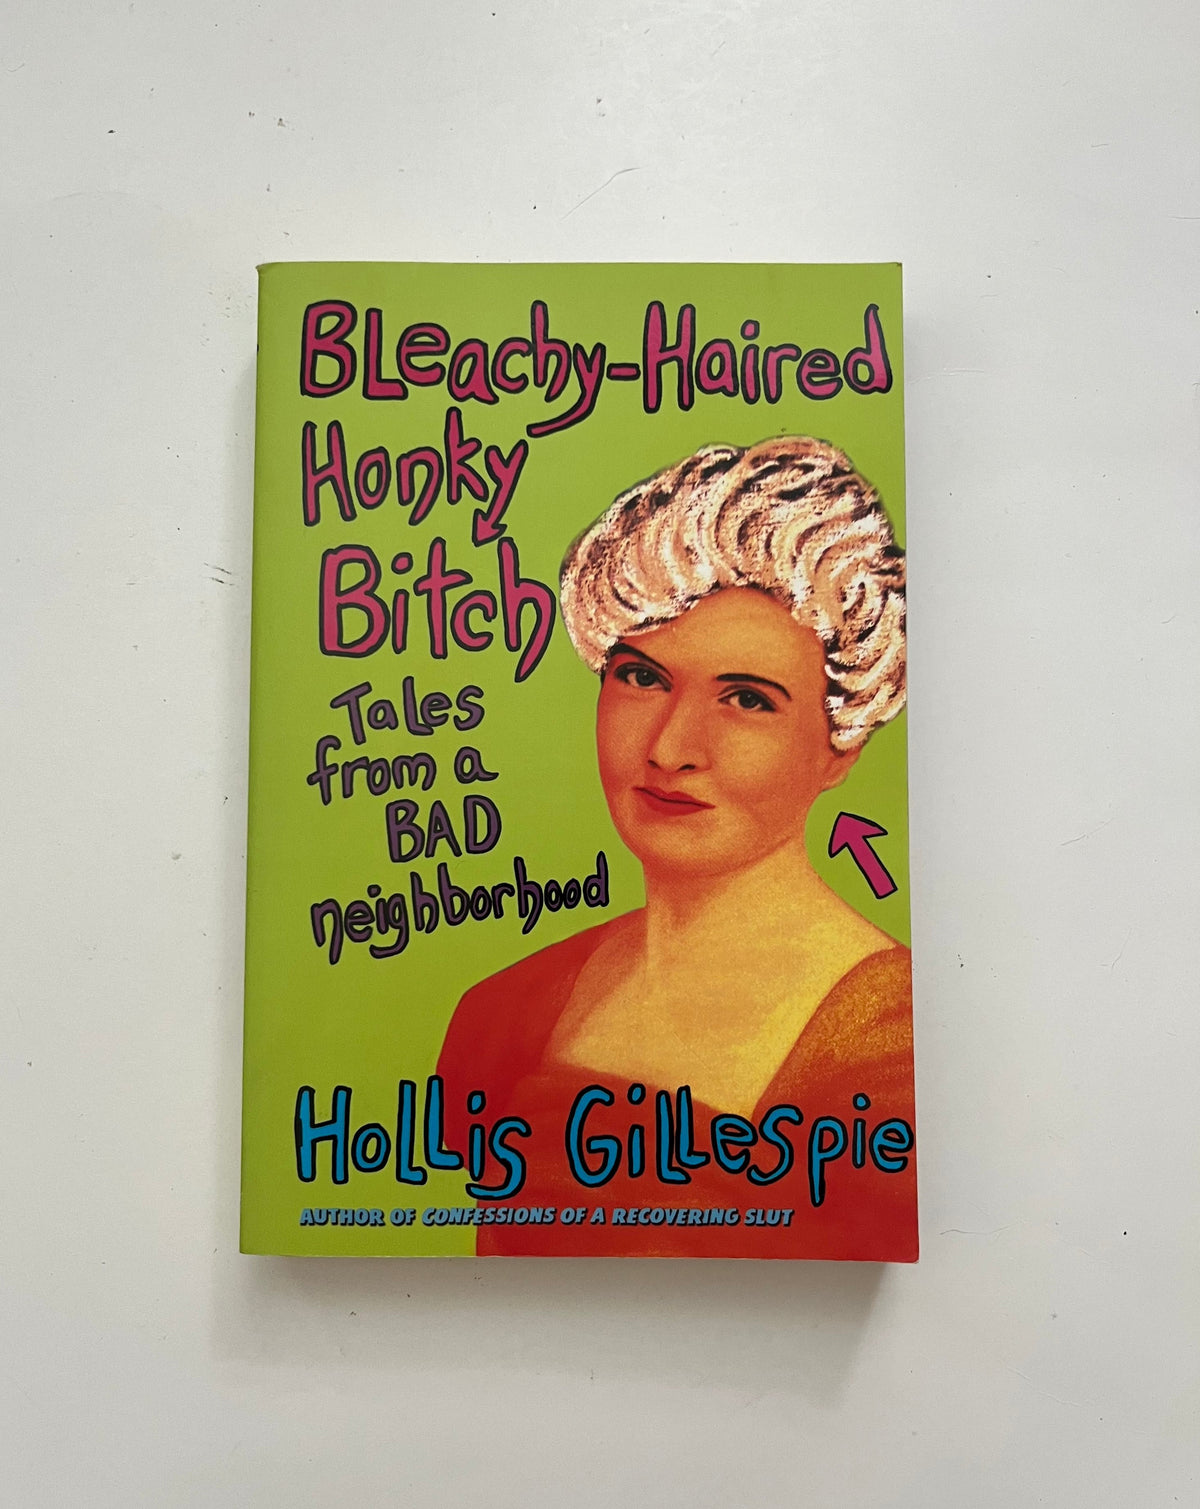 Bleach-Haired Honky Bitch: Tales from a Bad Neighborhood by Hollis Gillespie